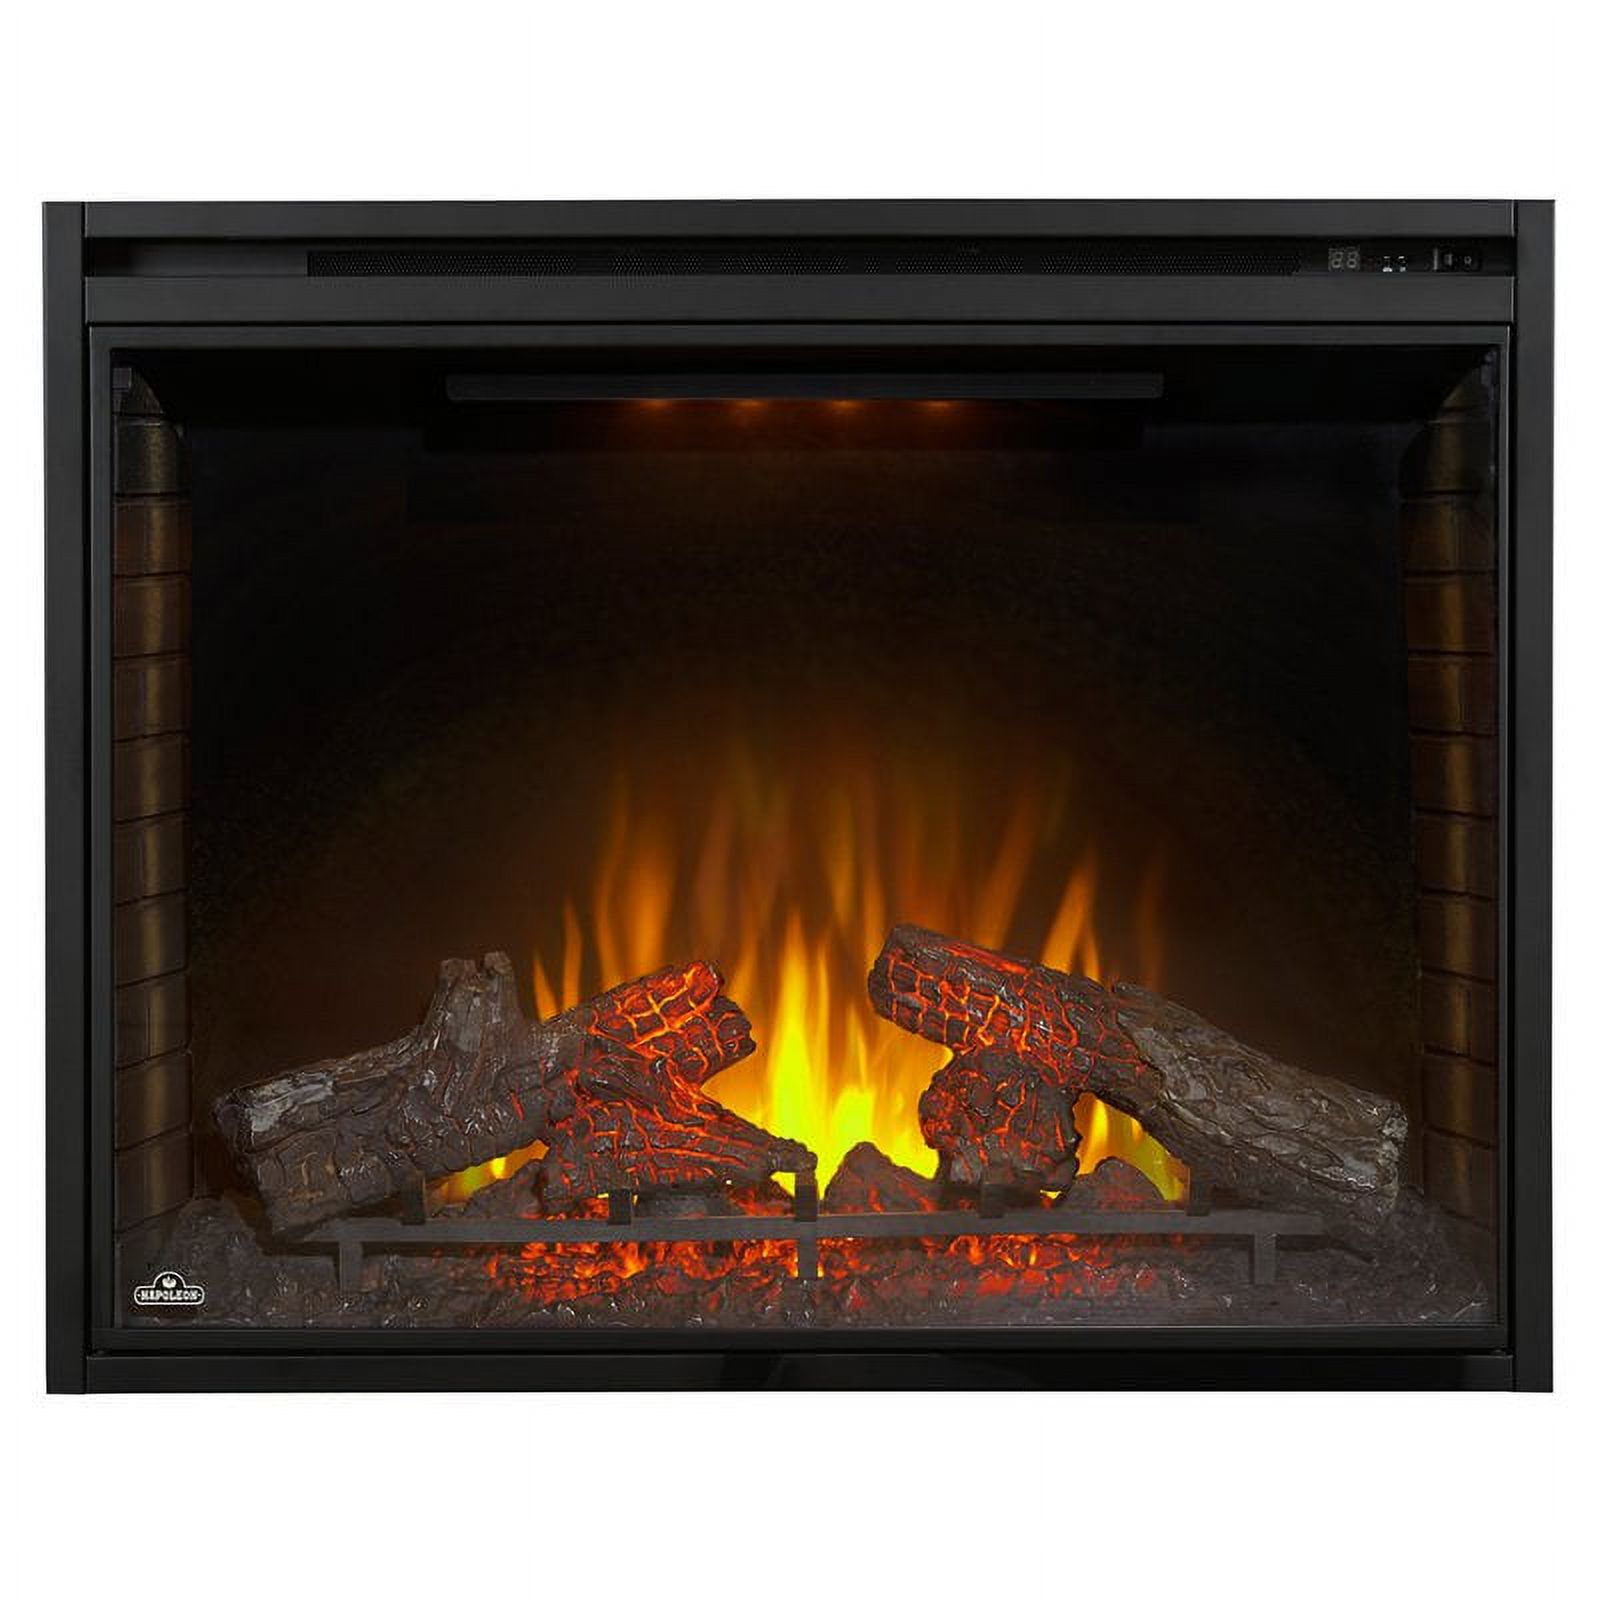 Napoleon 40 in. Built-in Electric Firebox Insert - image 1 of 11